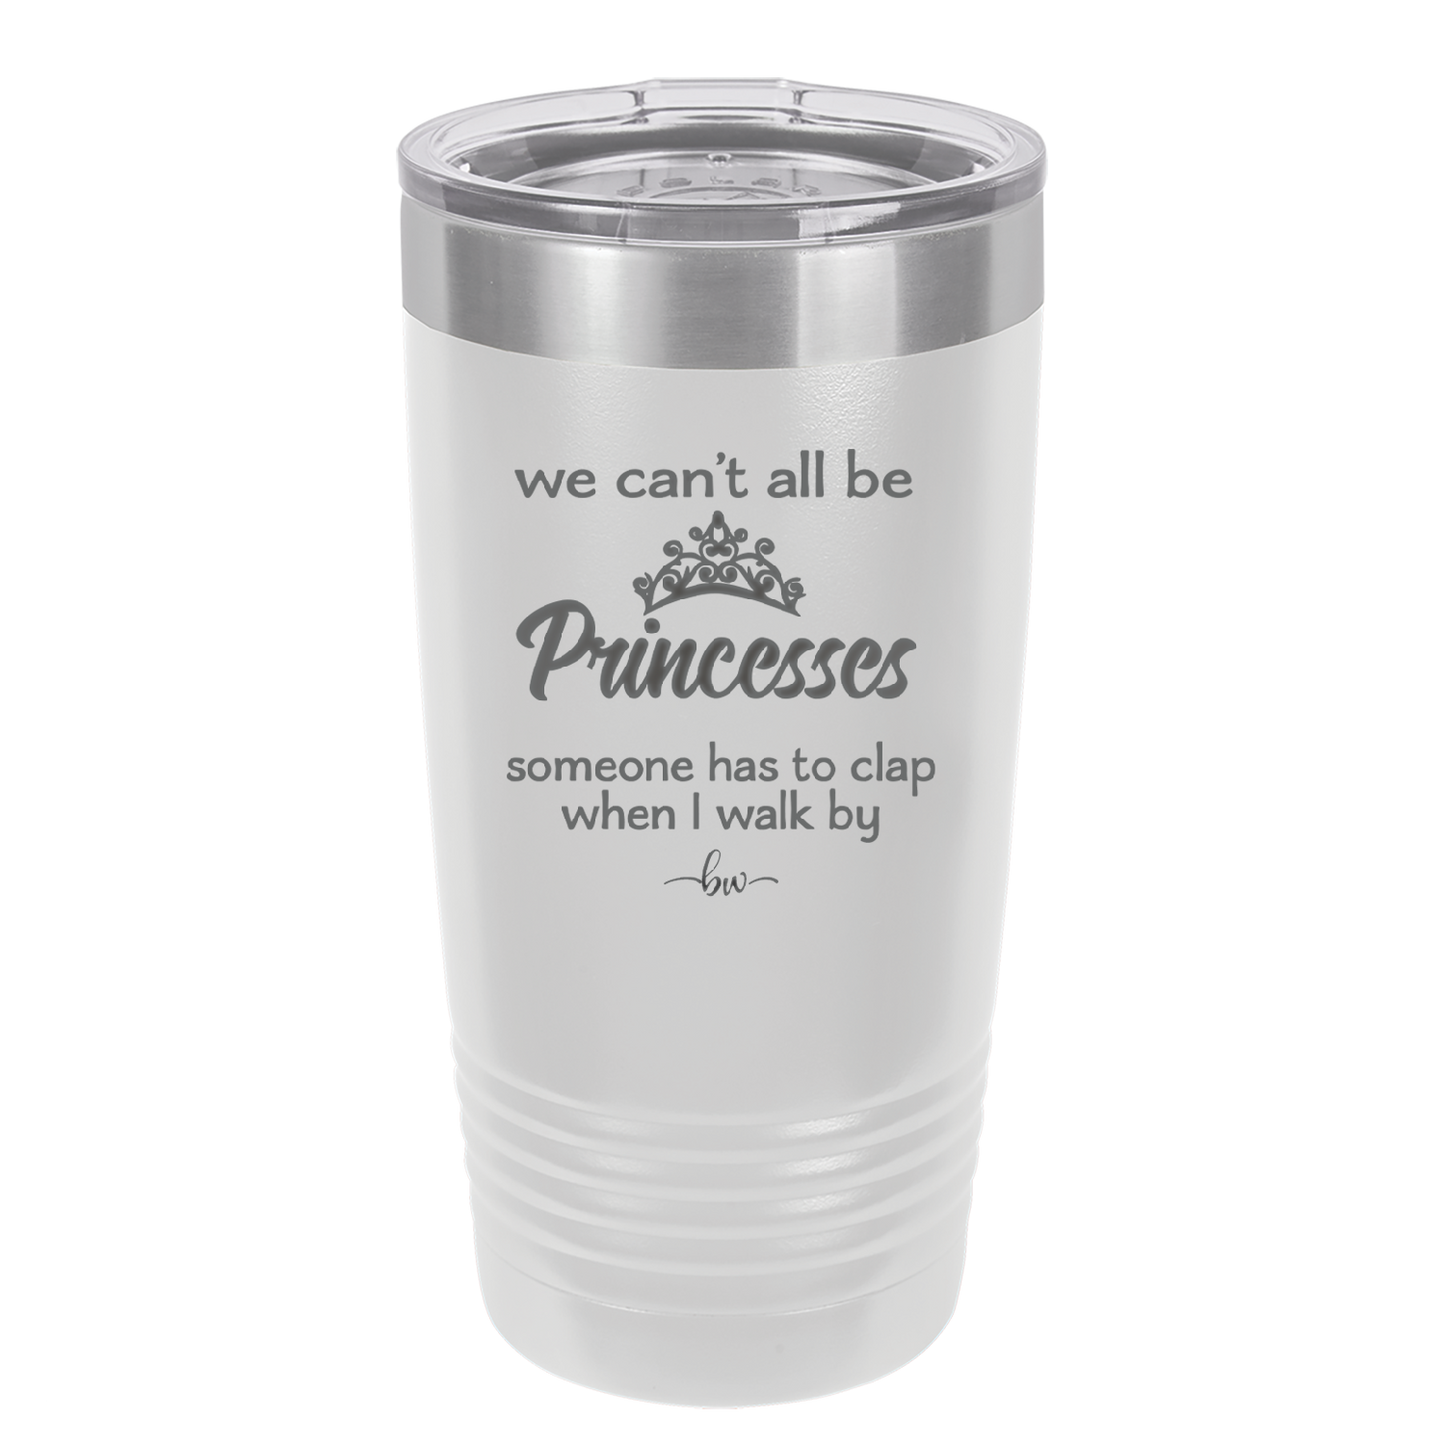 We Can't All Be Princesses - Laser Engraved Stainless Steel Drinkware - 1181 -